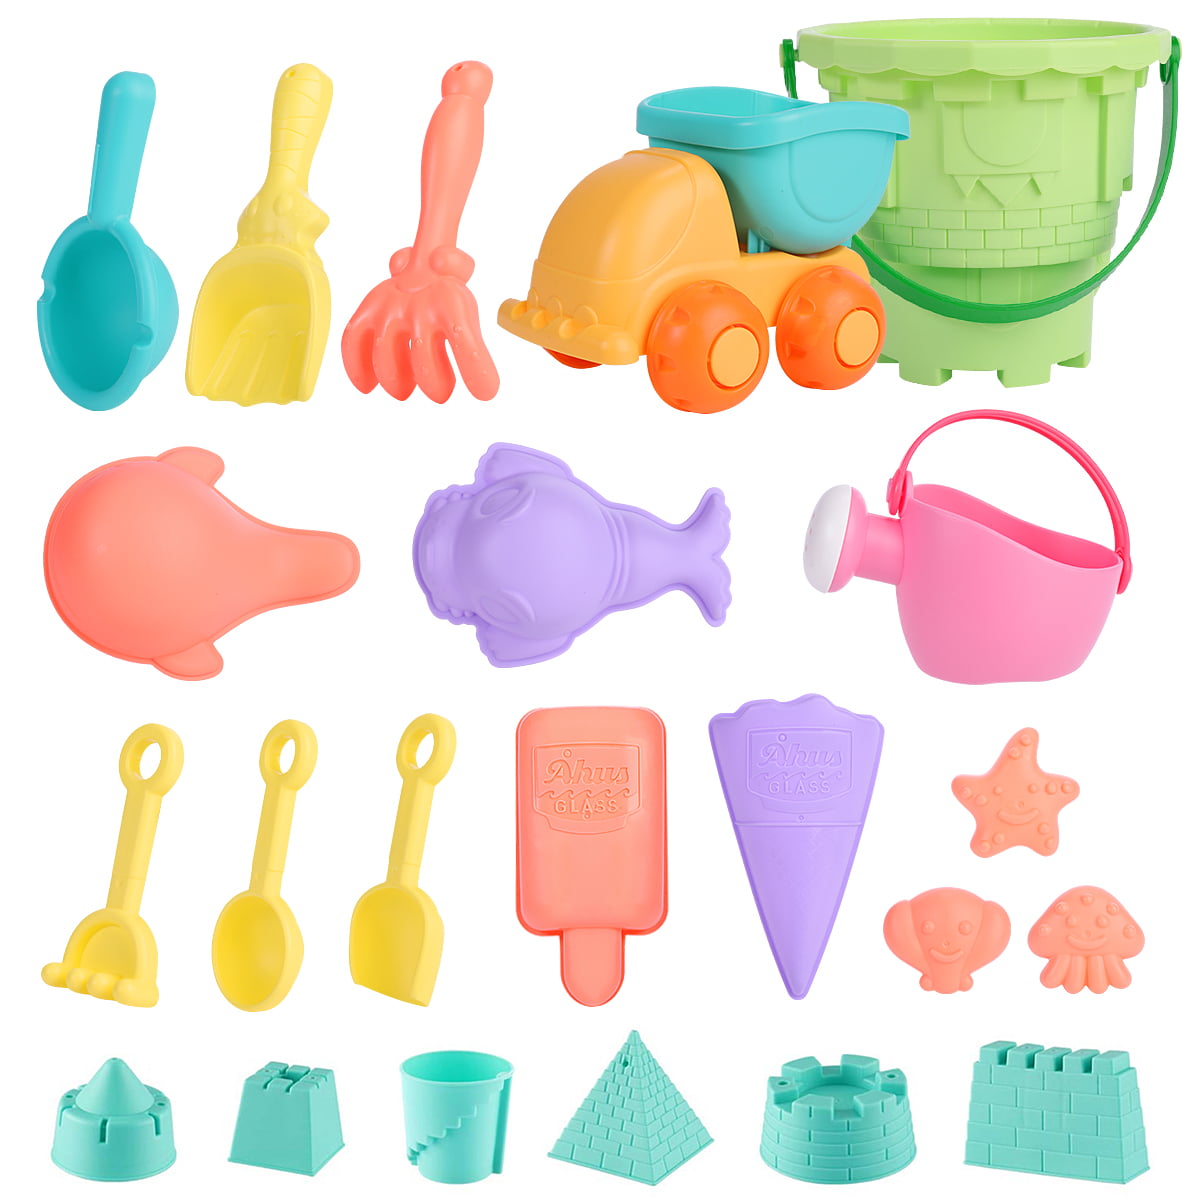 Beach Toys Kids Sand Toys 11pcs with Bucket Pail Animal Molds and Spade Scoop for Toddler Outdoor Toys in Mesh Beach Bag 